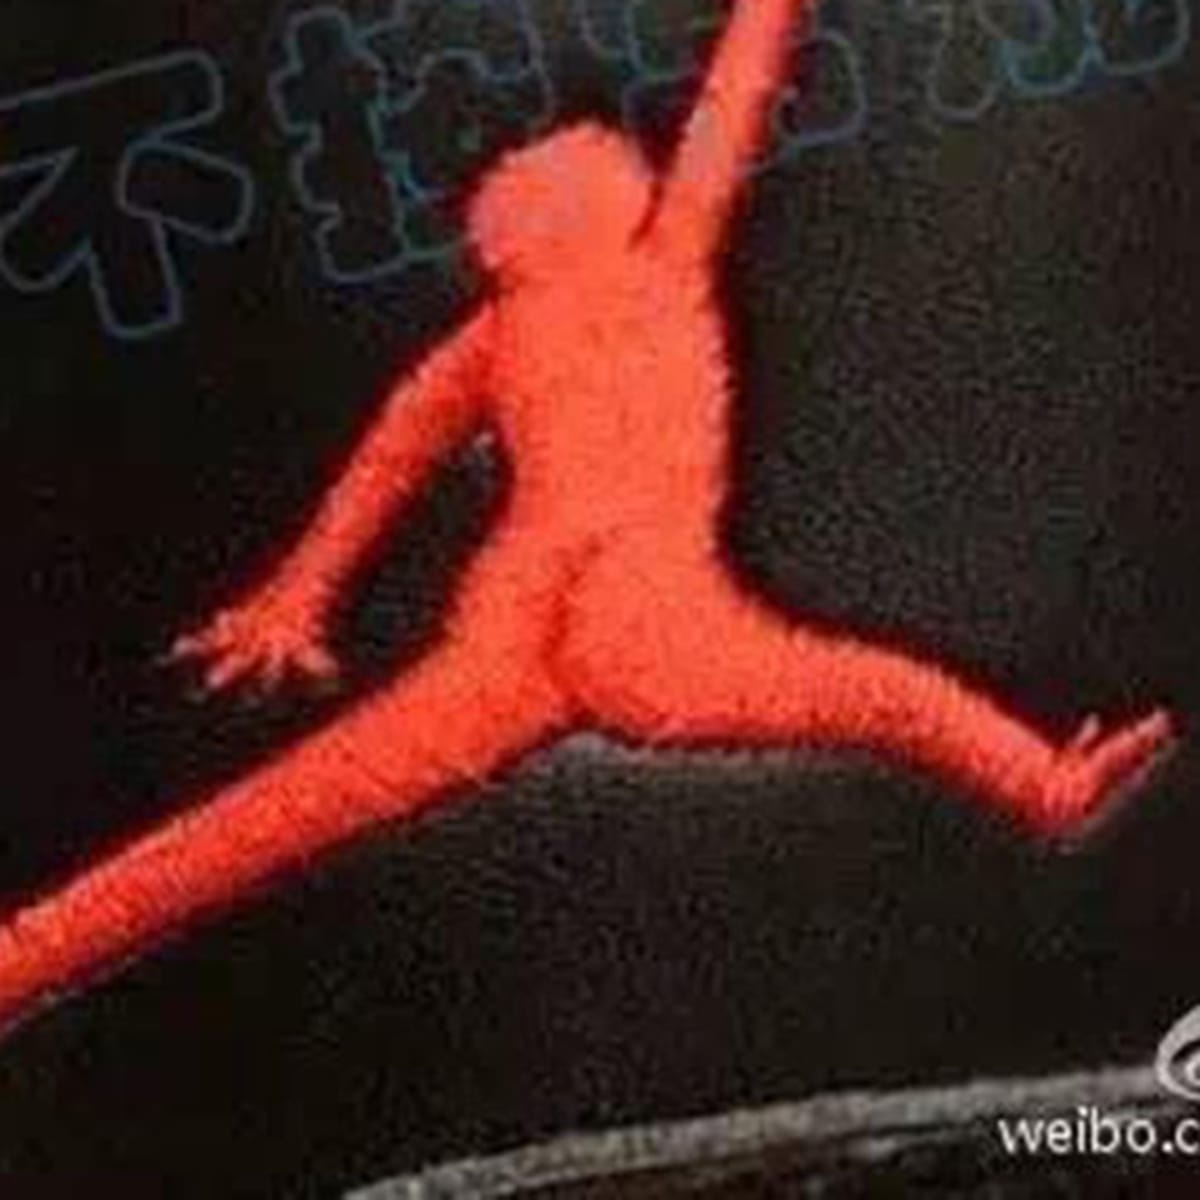 Chinese counterfeit Air Jordans come 